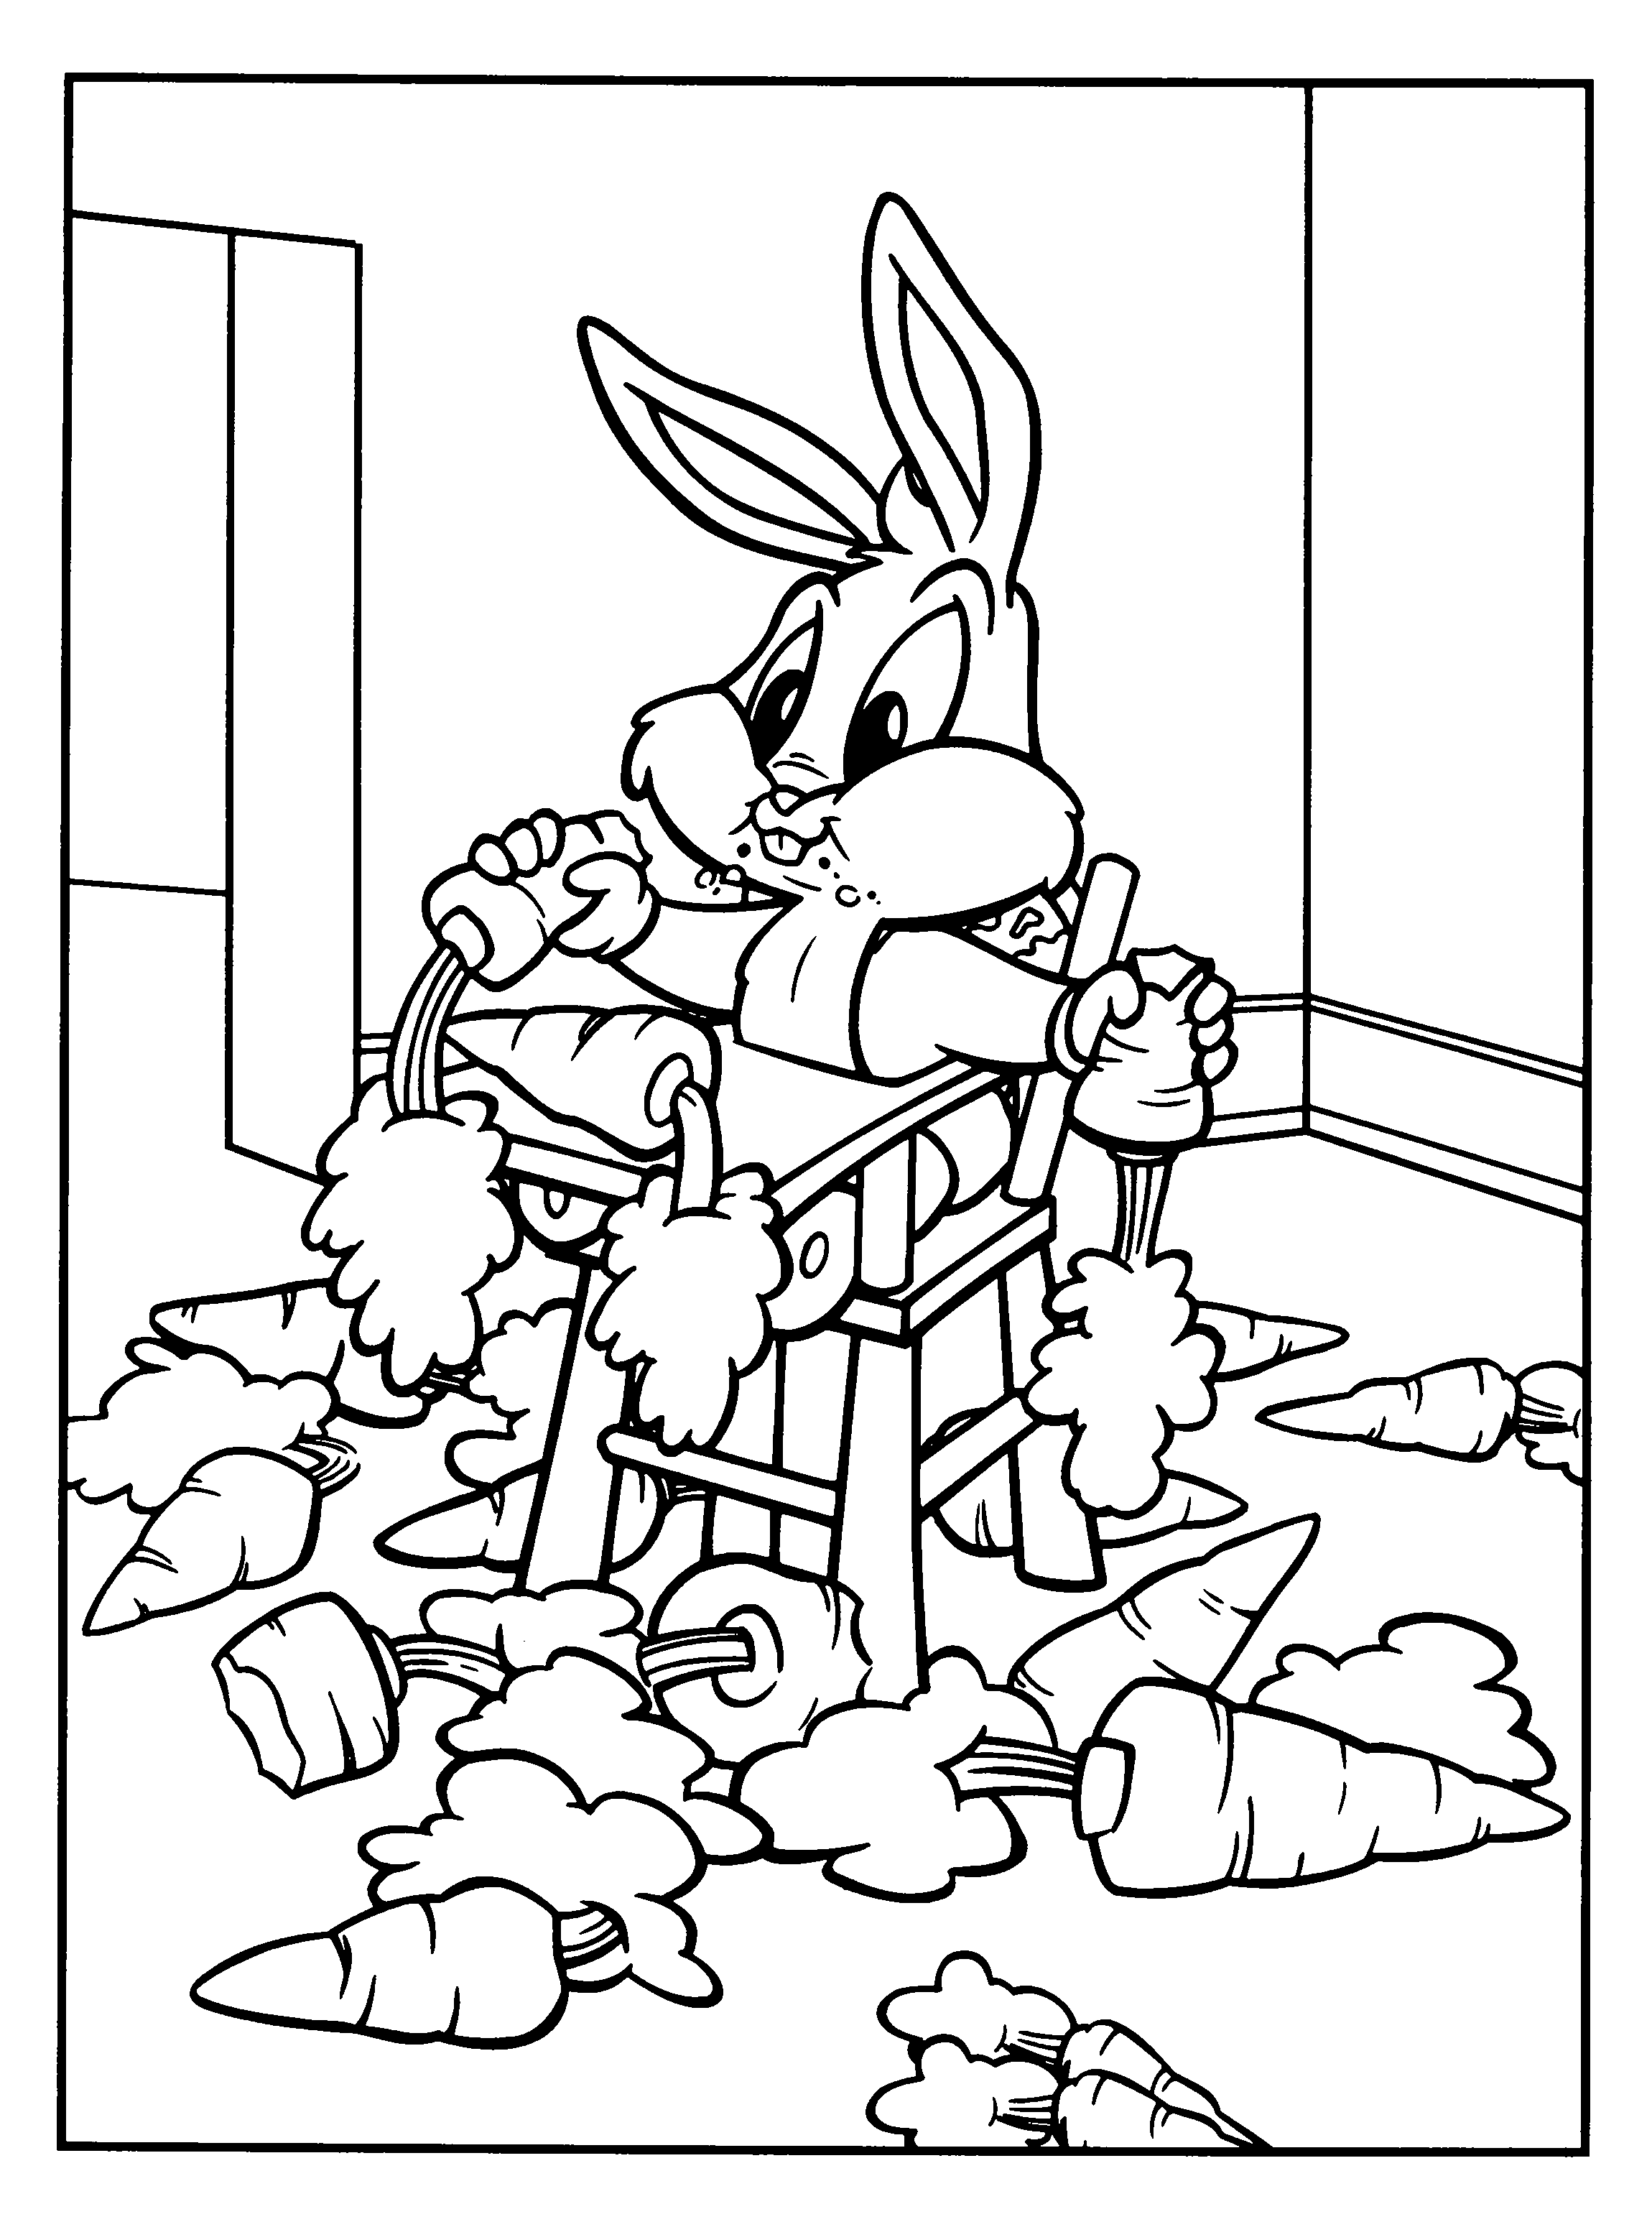 looney toons coloring pages 1000 images about looney tunes on pinterest looney coloring pages toons looney 